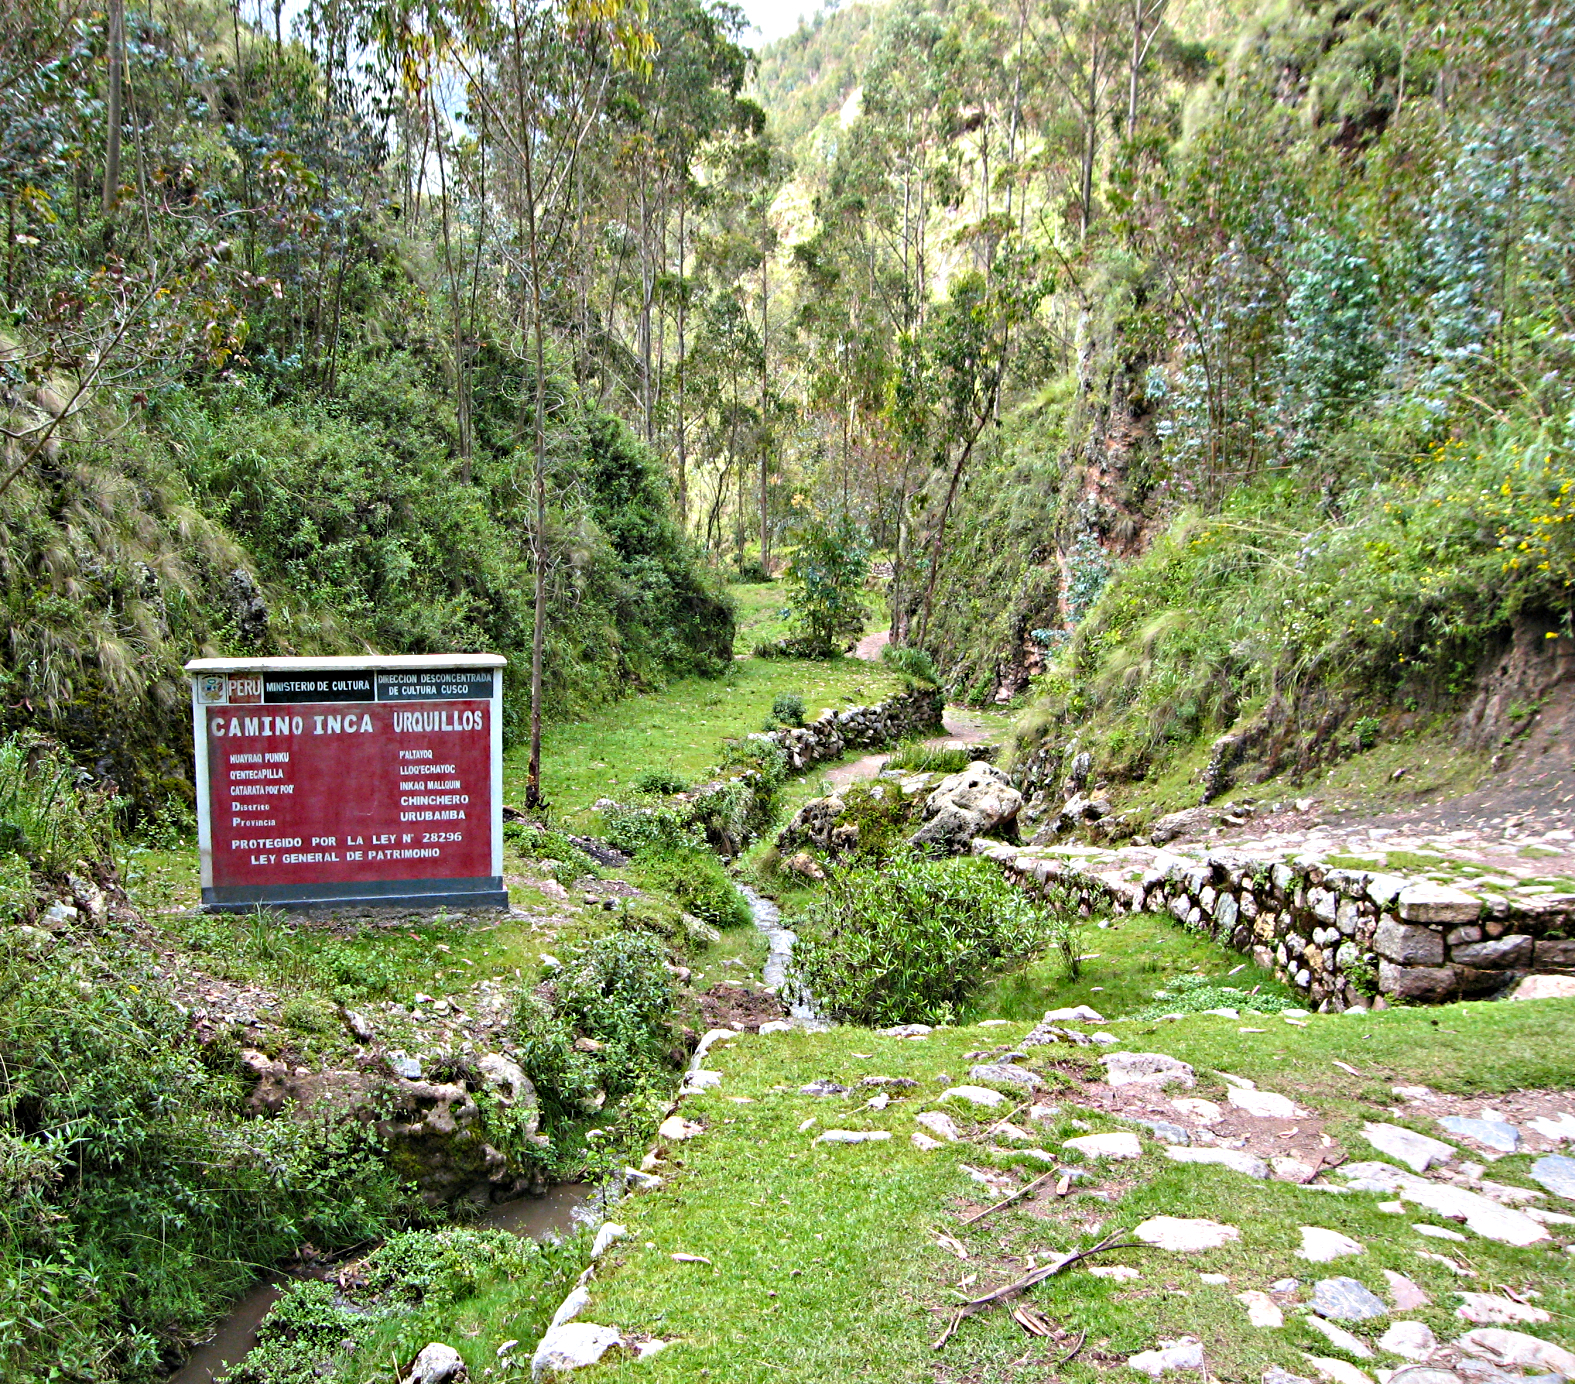 Hiking from Chinchero down to the Urabamba River in Peru's Sacred ValleyRiver